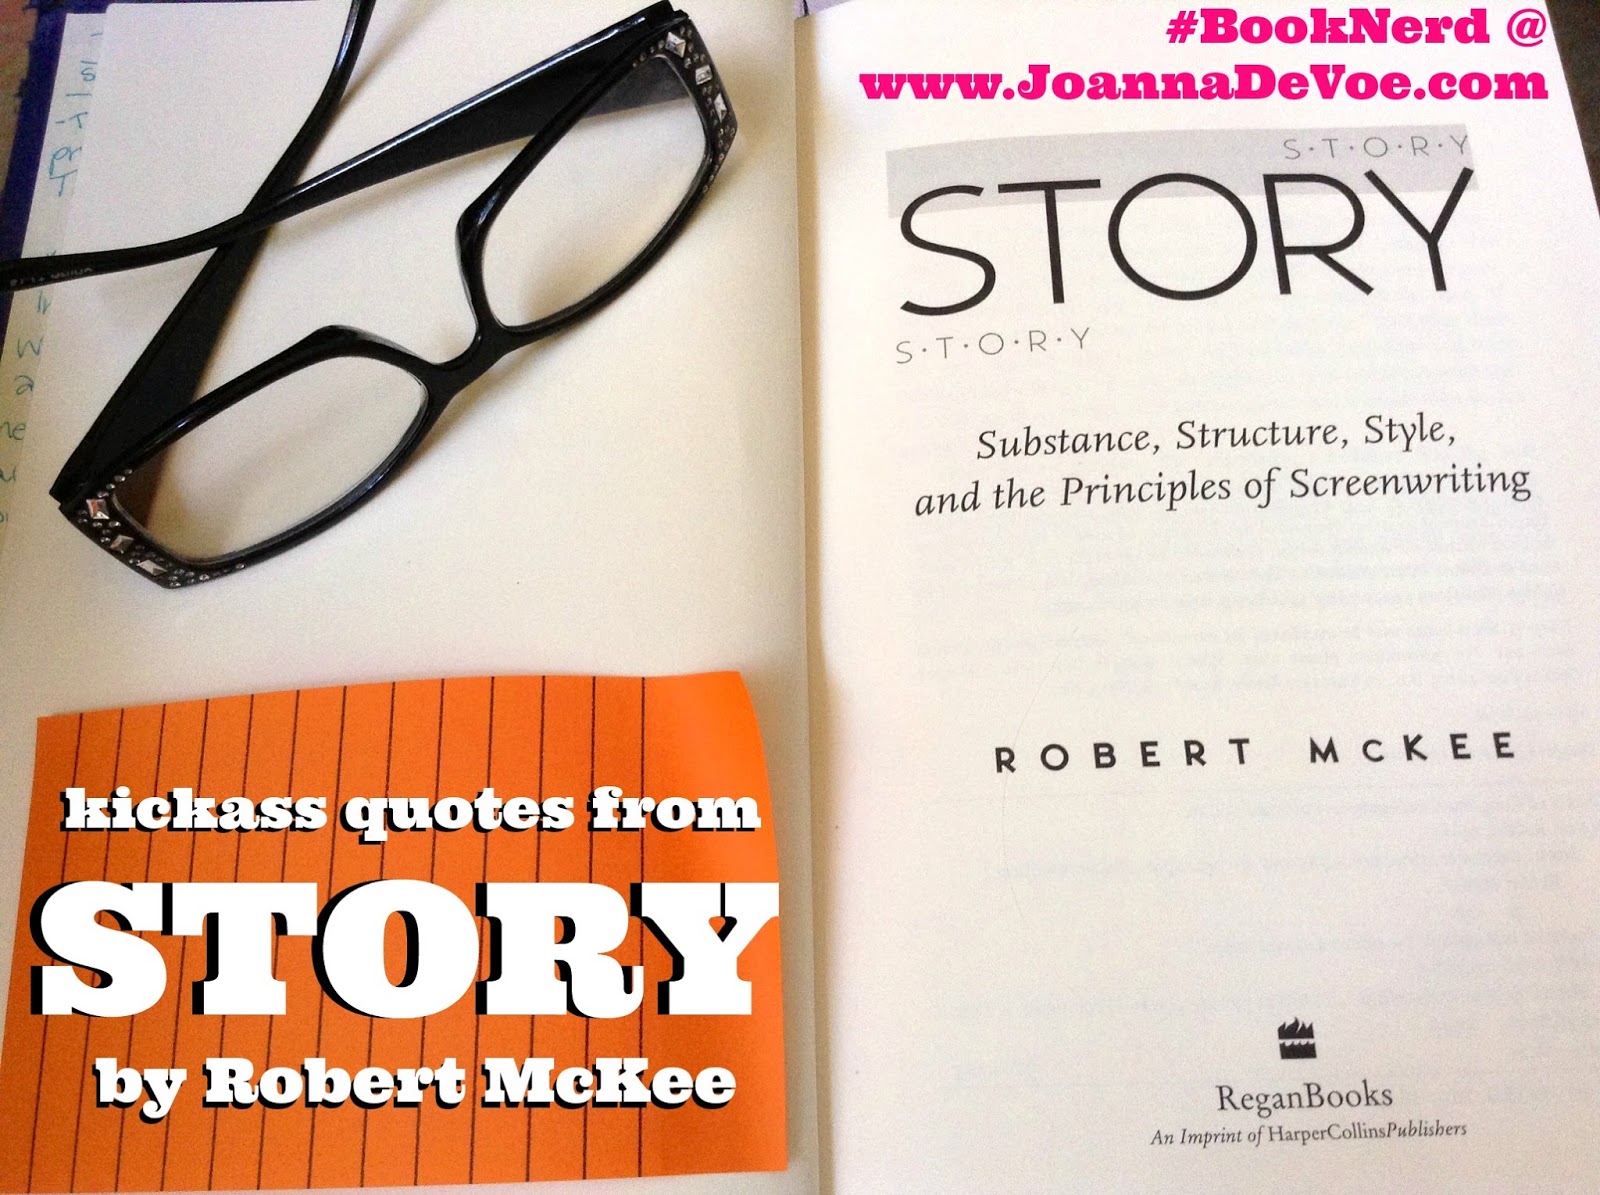 robert mckee story substance structure style and the principles of screenwriting